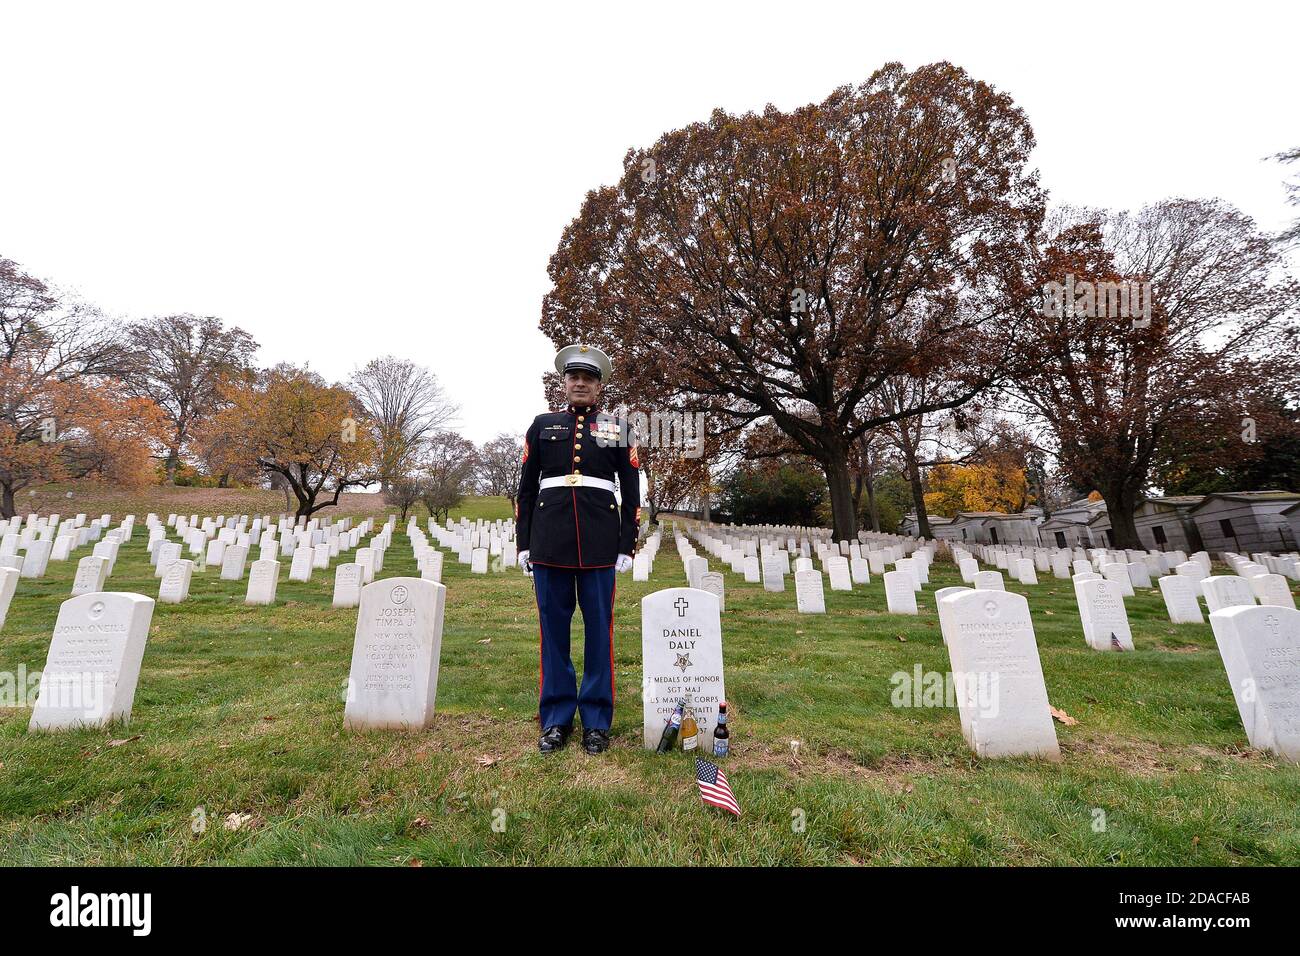 Former US Marine Albert Grajales stands at attention beside the headstone of honored United States Marine Daniel Dal (1837-1937), at Cypress Hills National Cemetery in the Brooklyn borough of New York, NY, on November 11, 2020. Mr. Grajales who also served in the Army and in the Air Force reserves, makes an annual pilgrimage to Cypress Hills National Cemetery on Veterans Day in memory of those lost in combat; United States Marine Daniel Daly is one of only two Marines to have received the Medal of Honor twice for two different actions. (Anthony Behar/Sipa USA) Stock Photo